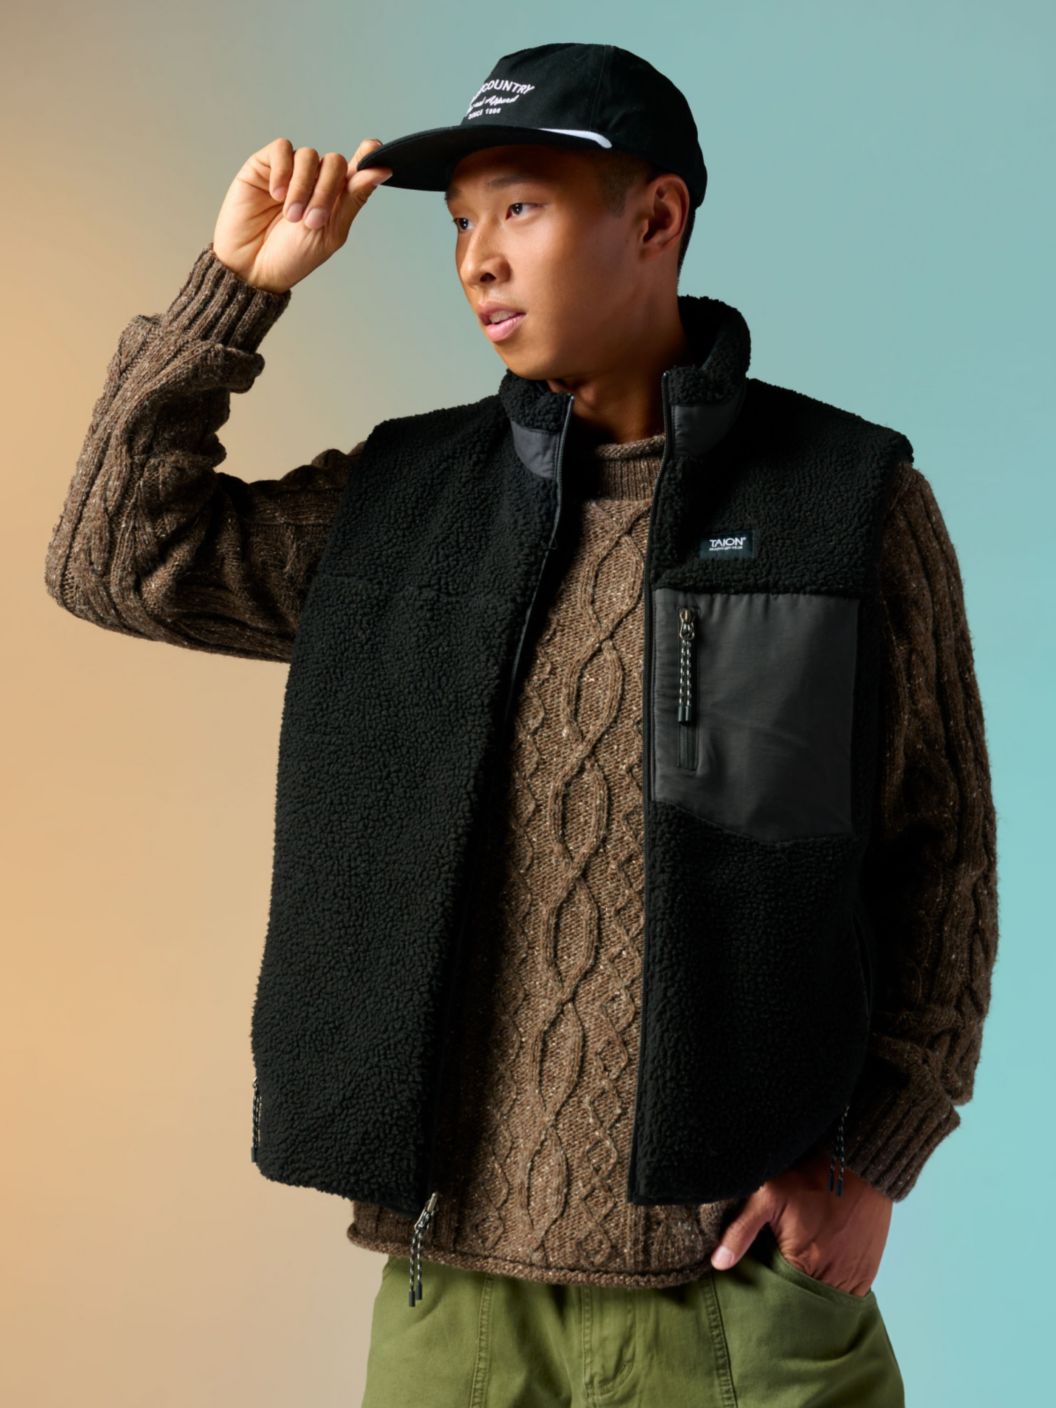 A man in a fisherman’s sweater, fleece vest, and 5-panel hat.